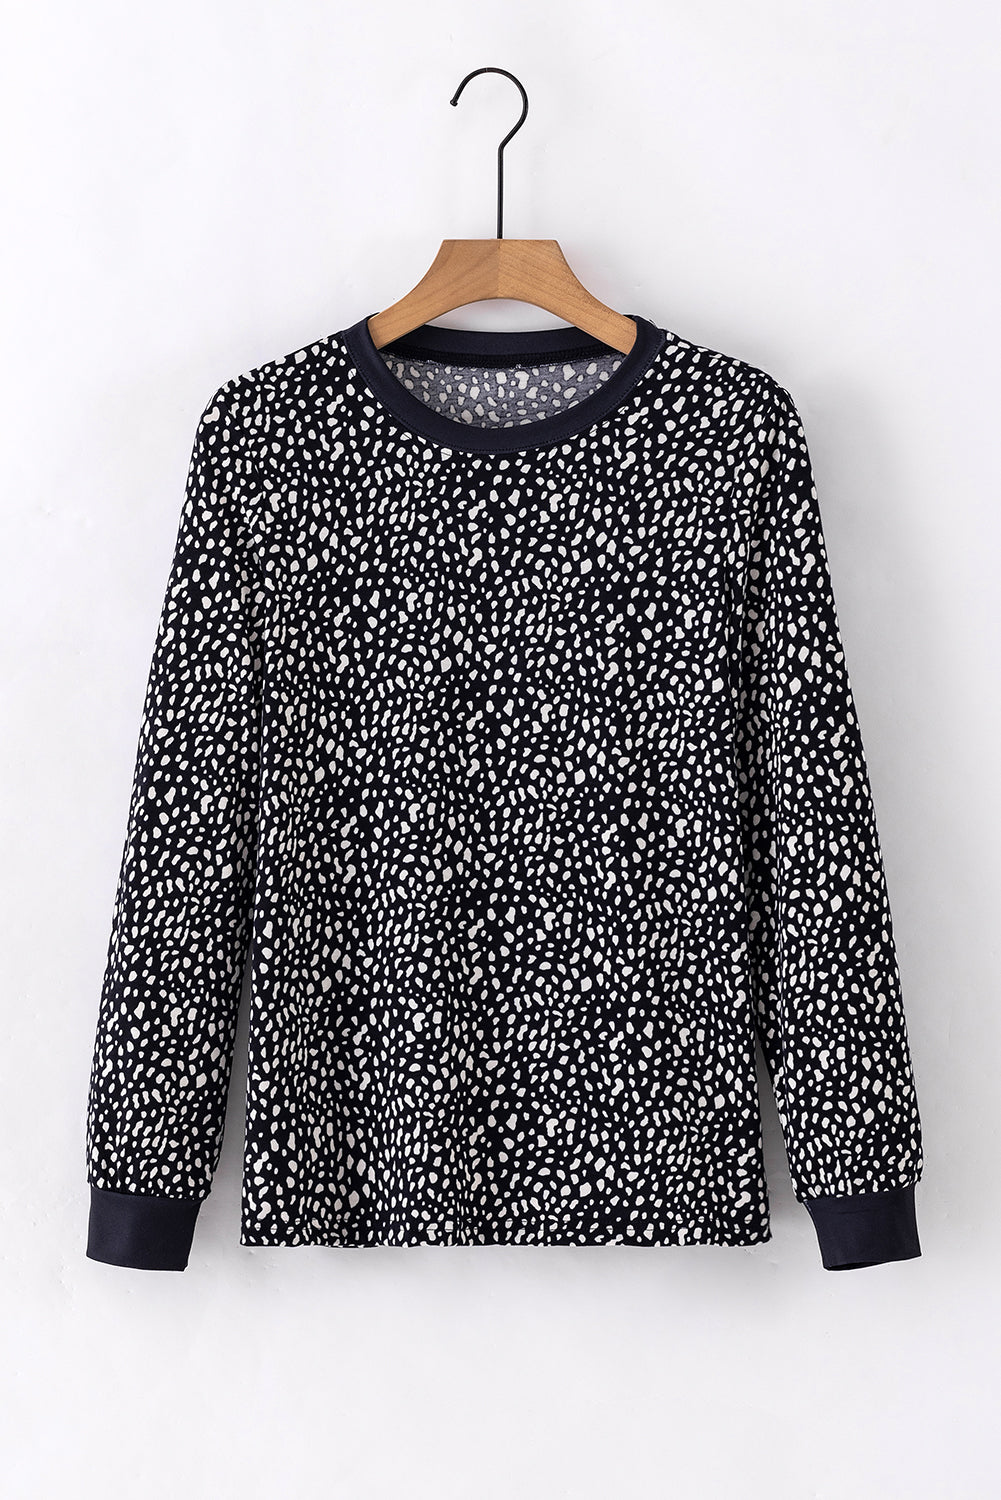 Gray Animal Spotted Print Round Neck Long Sleeve Top